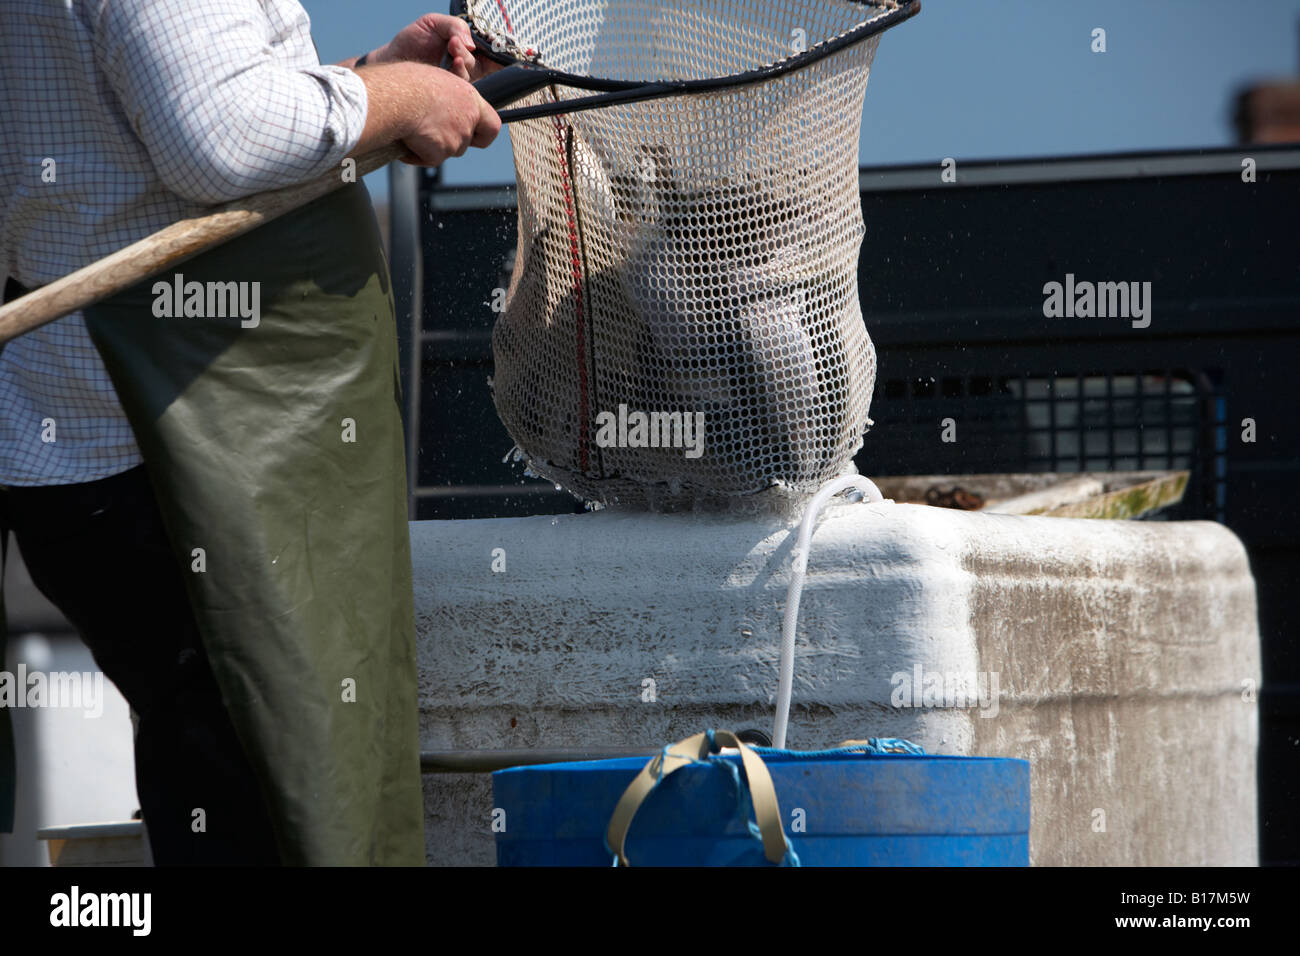 man wearing plastic apron fills barrel with rainbow trout from tank mounted on the back of a van to restock a game fishery Stock Photo